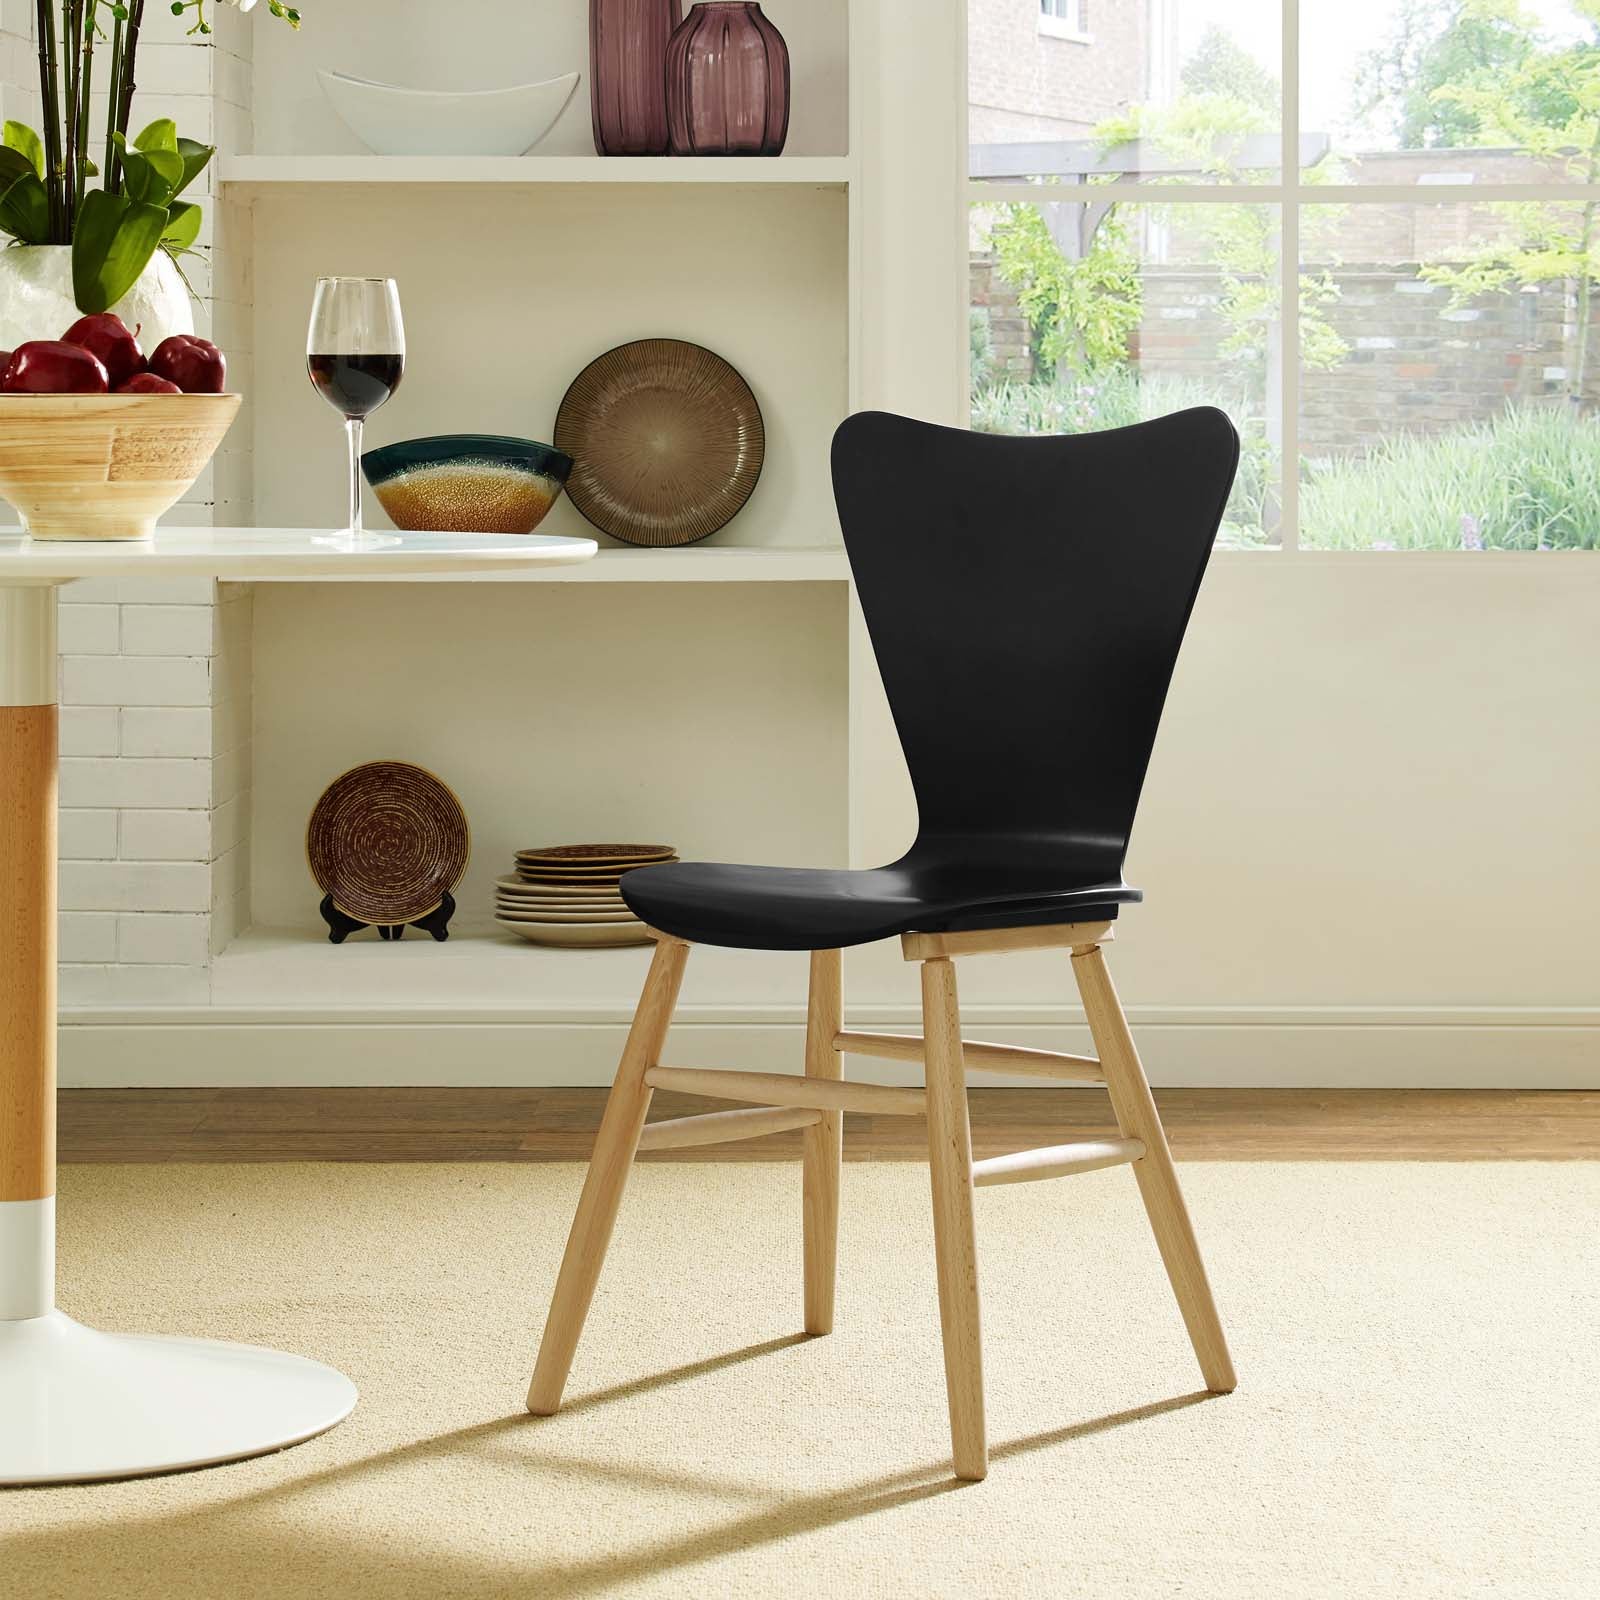 Cascade Wood Dining Chair - East Shore Modern Home Furnishings